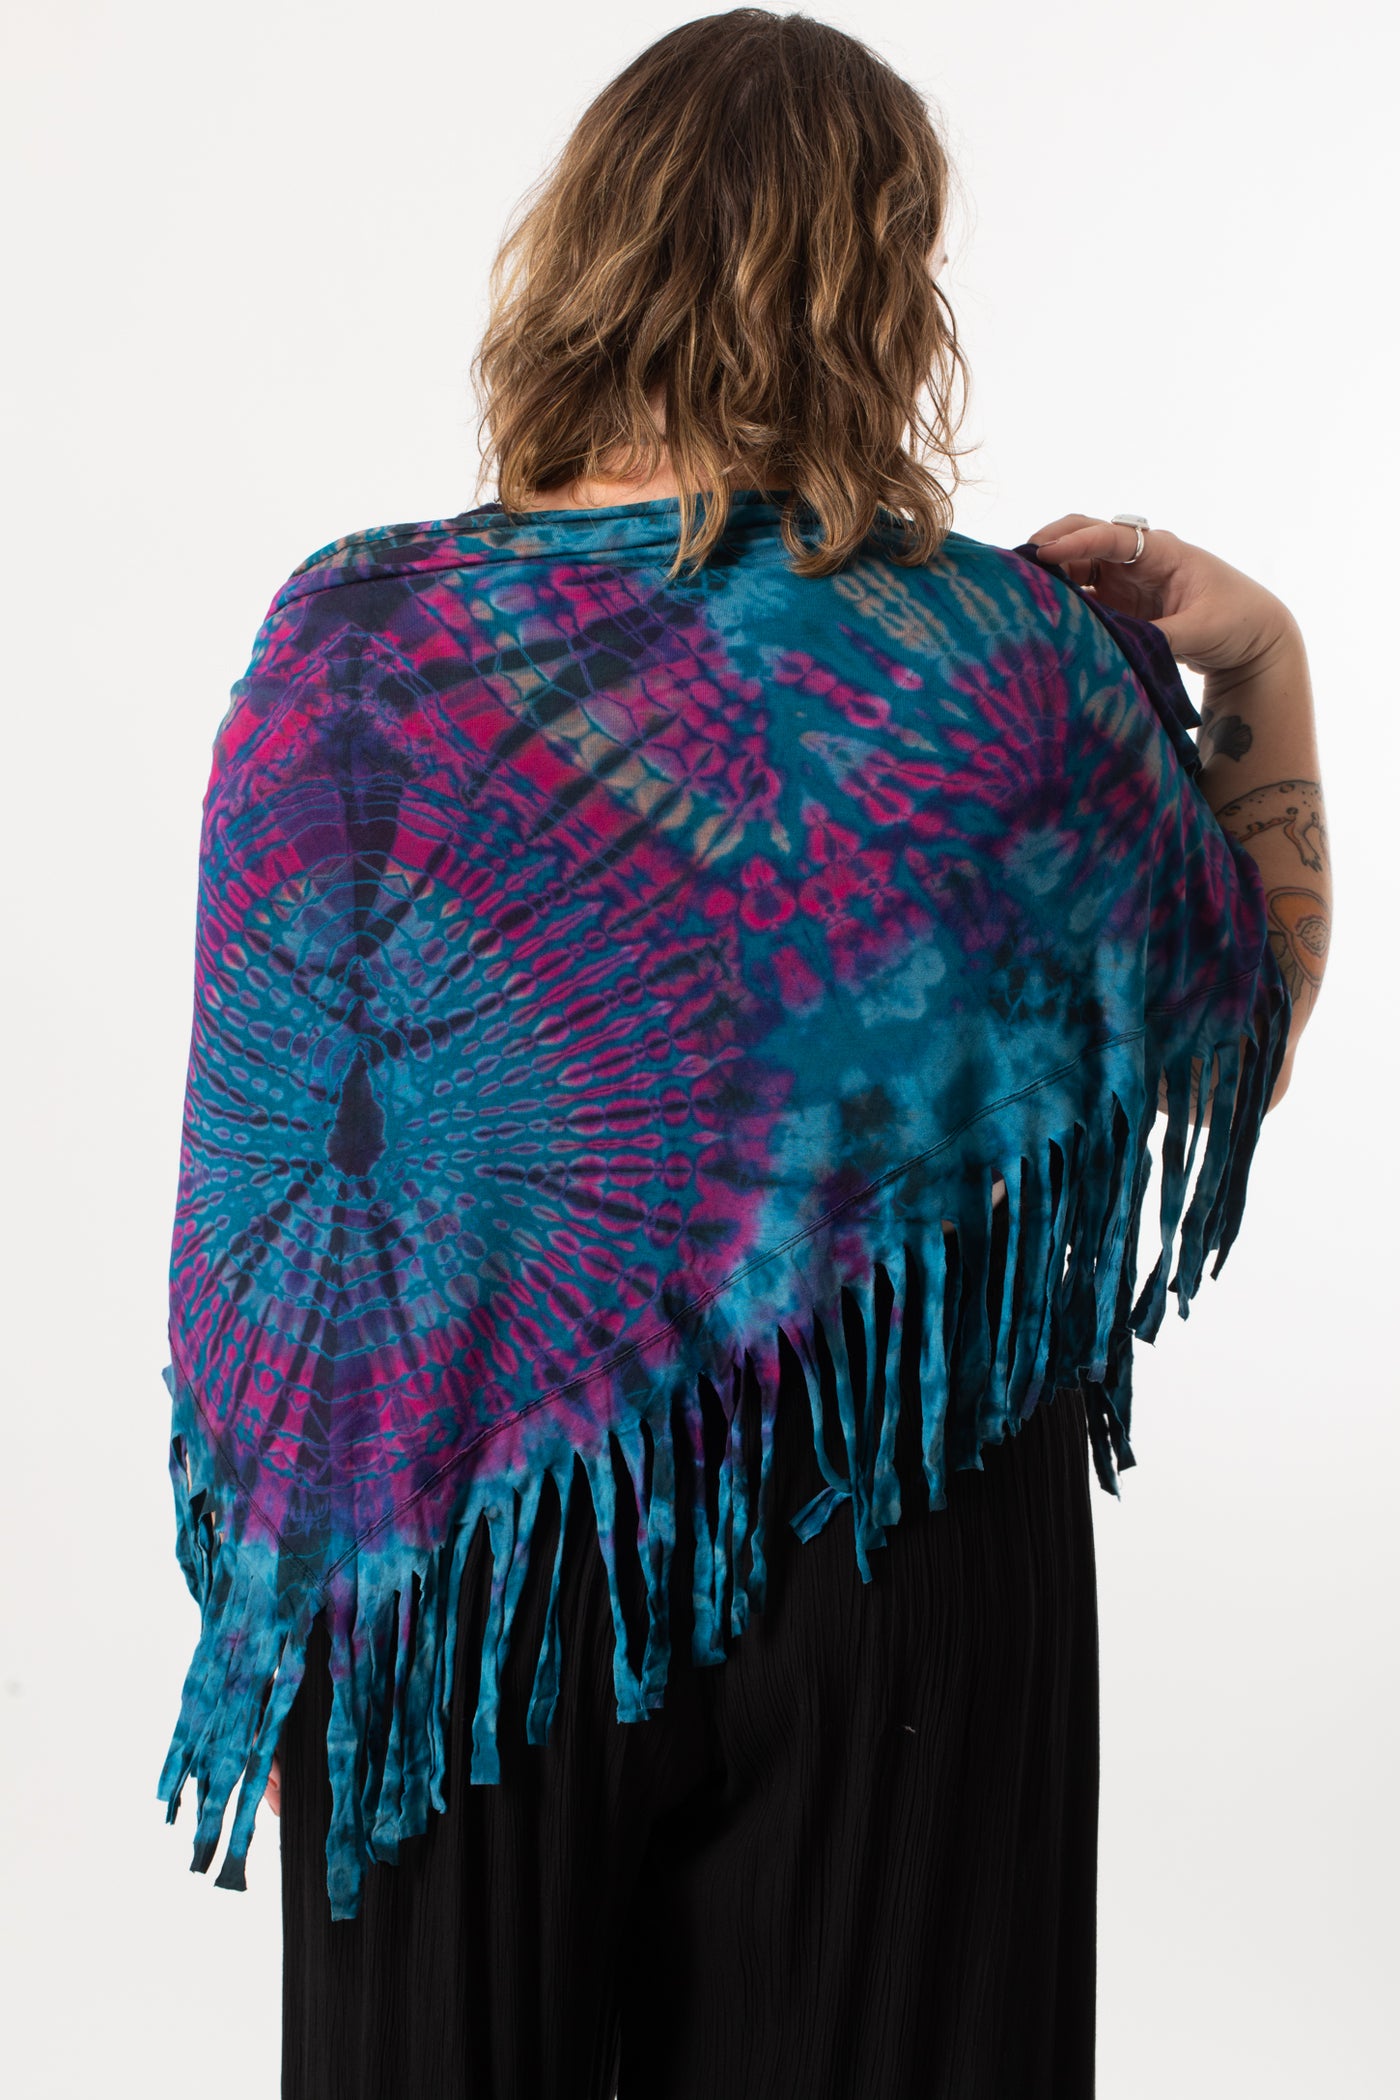 A Shawl to Dye For!